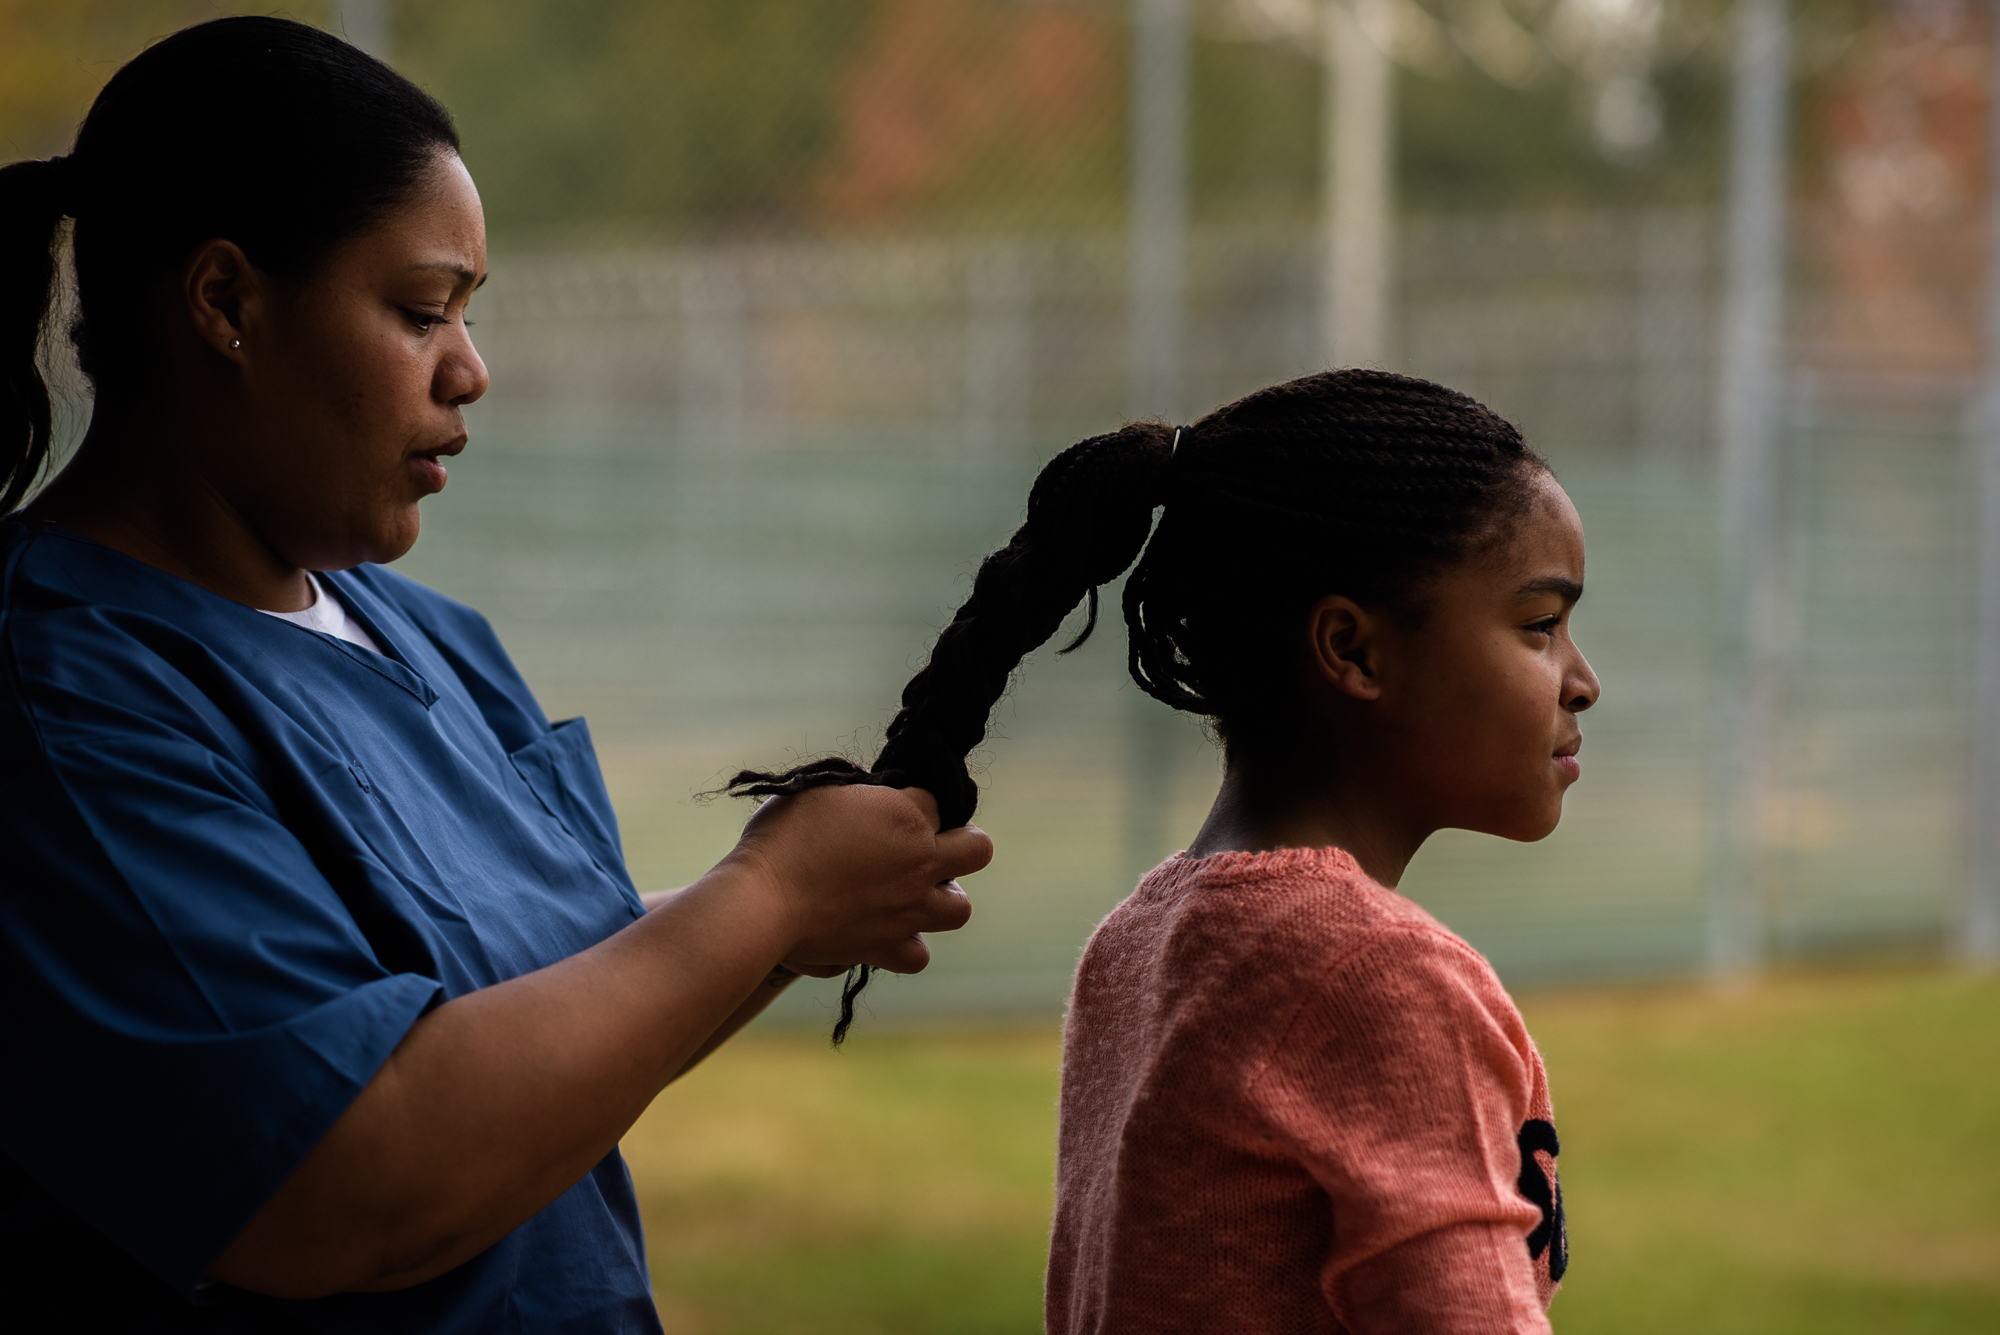  A mother braids her daughter’s hair in the recreation yard at the Lowell Correctional Institution in Ocala, Florida. 